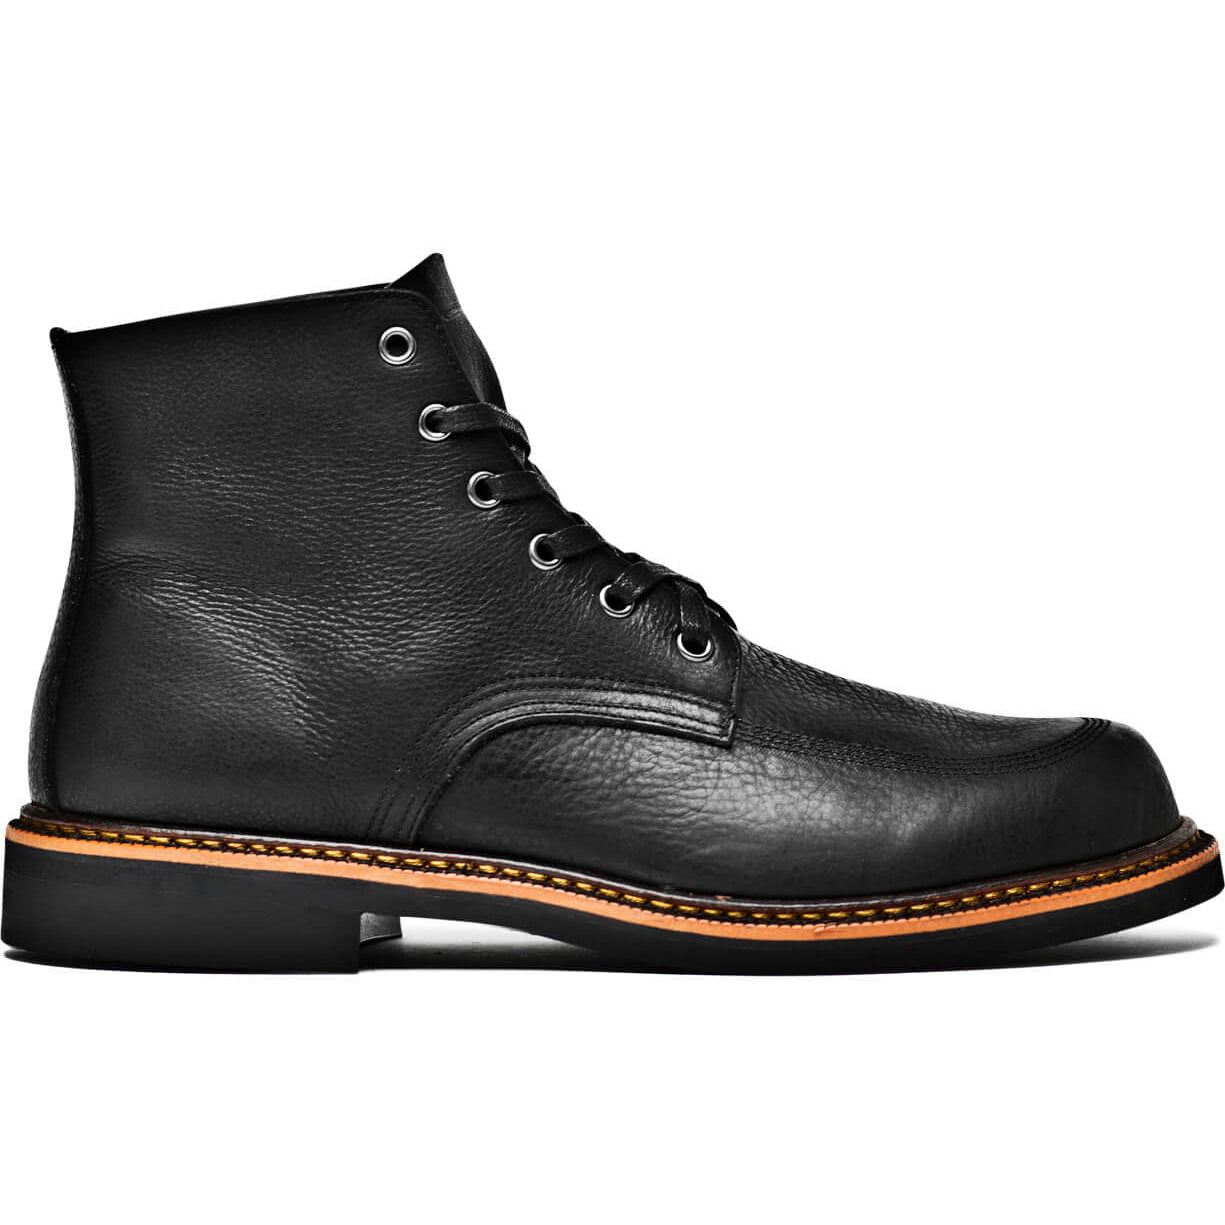 A comfortable Davis leather boot by Broken Homme.